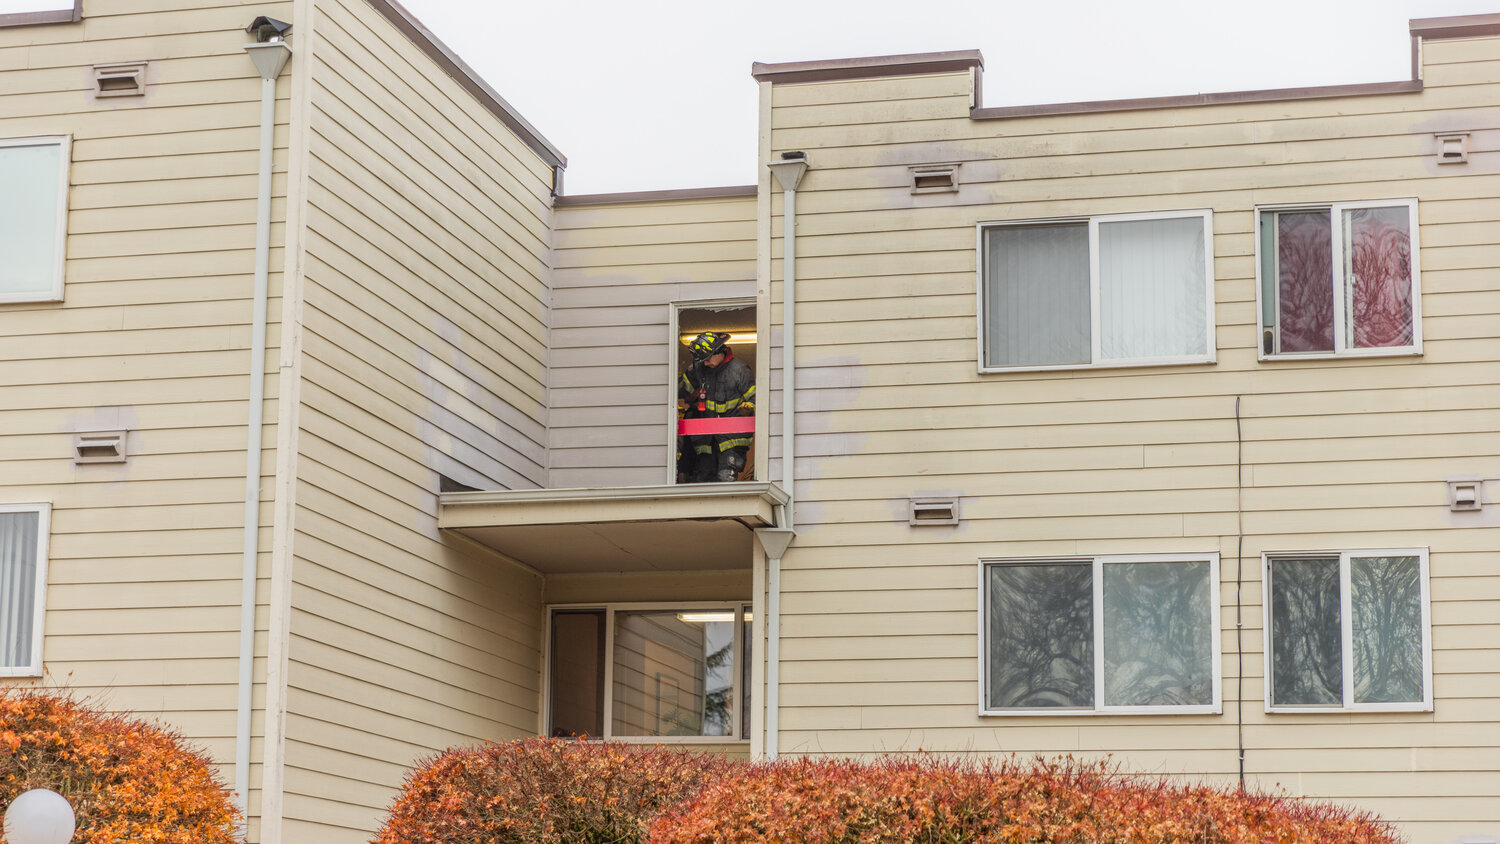 A firefighter inspects a window following a fire at the Centralia Manor Apartments Wednesday, Nov. 29.